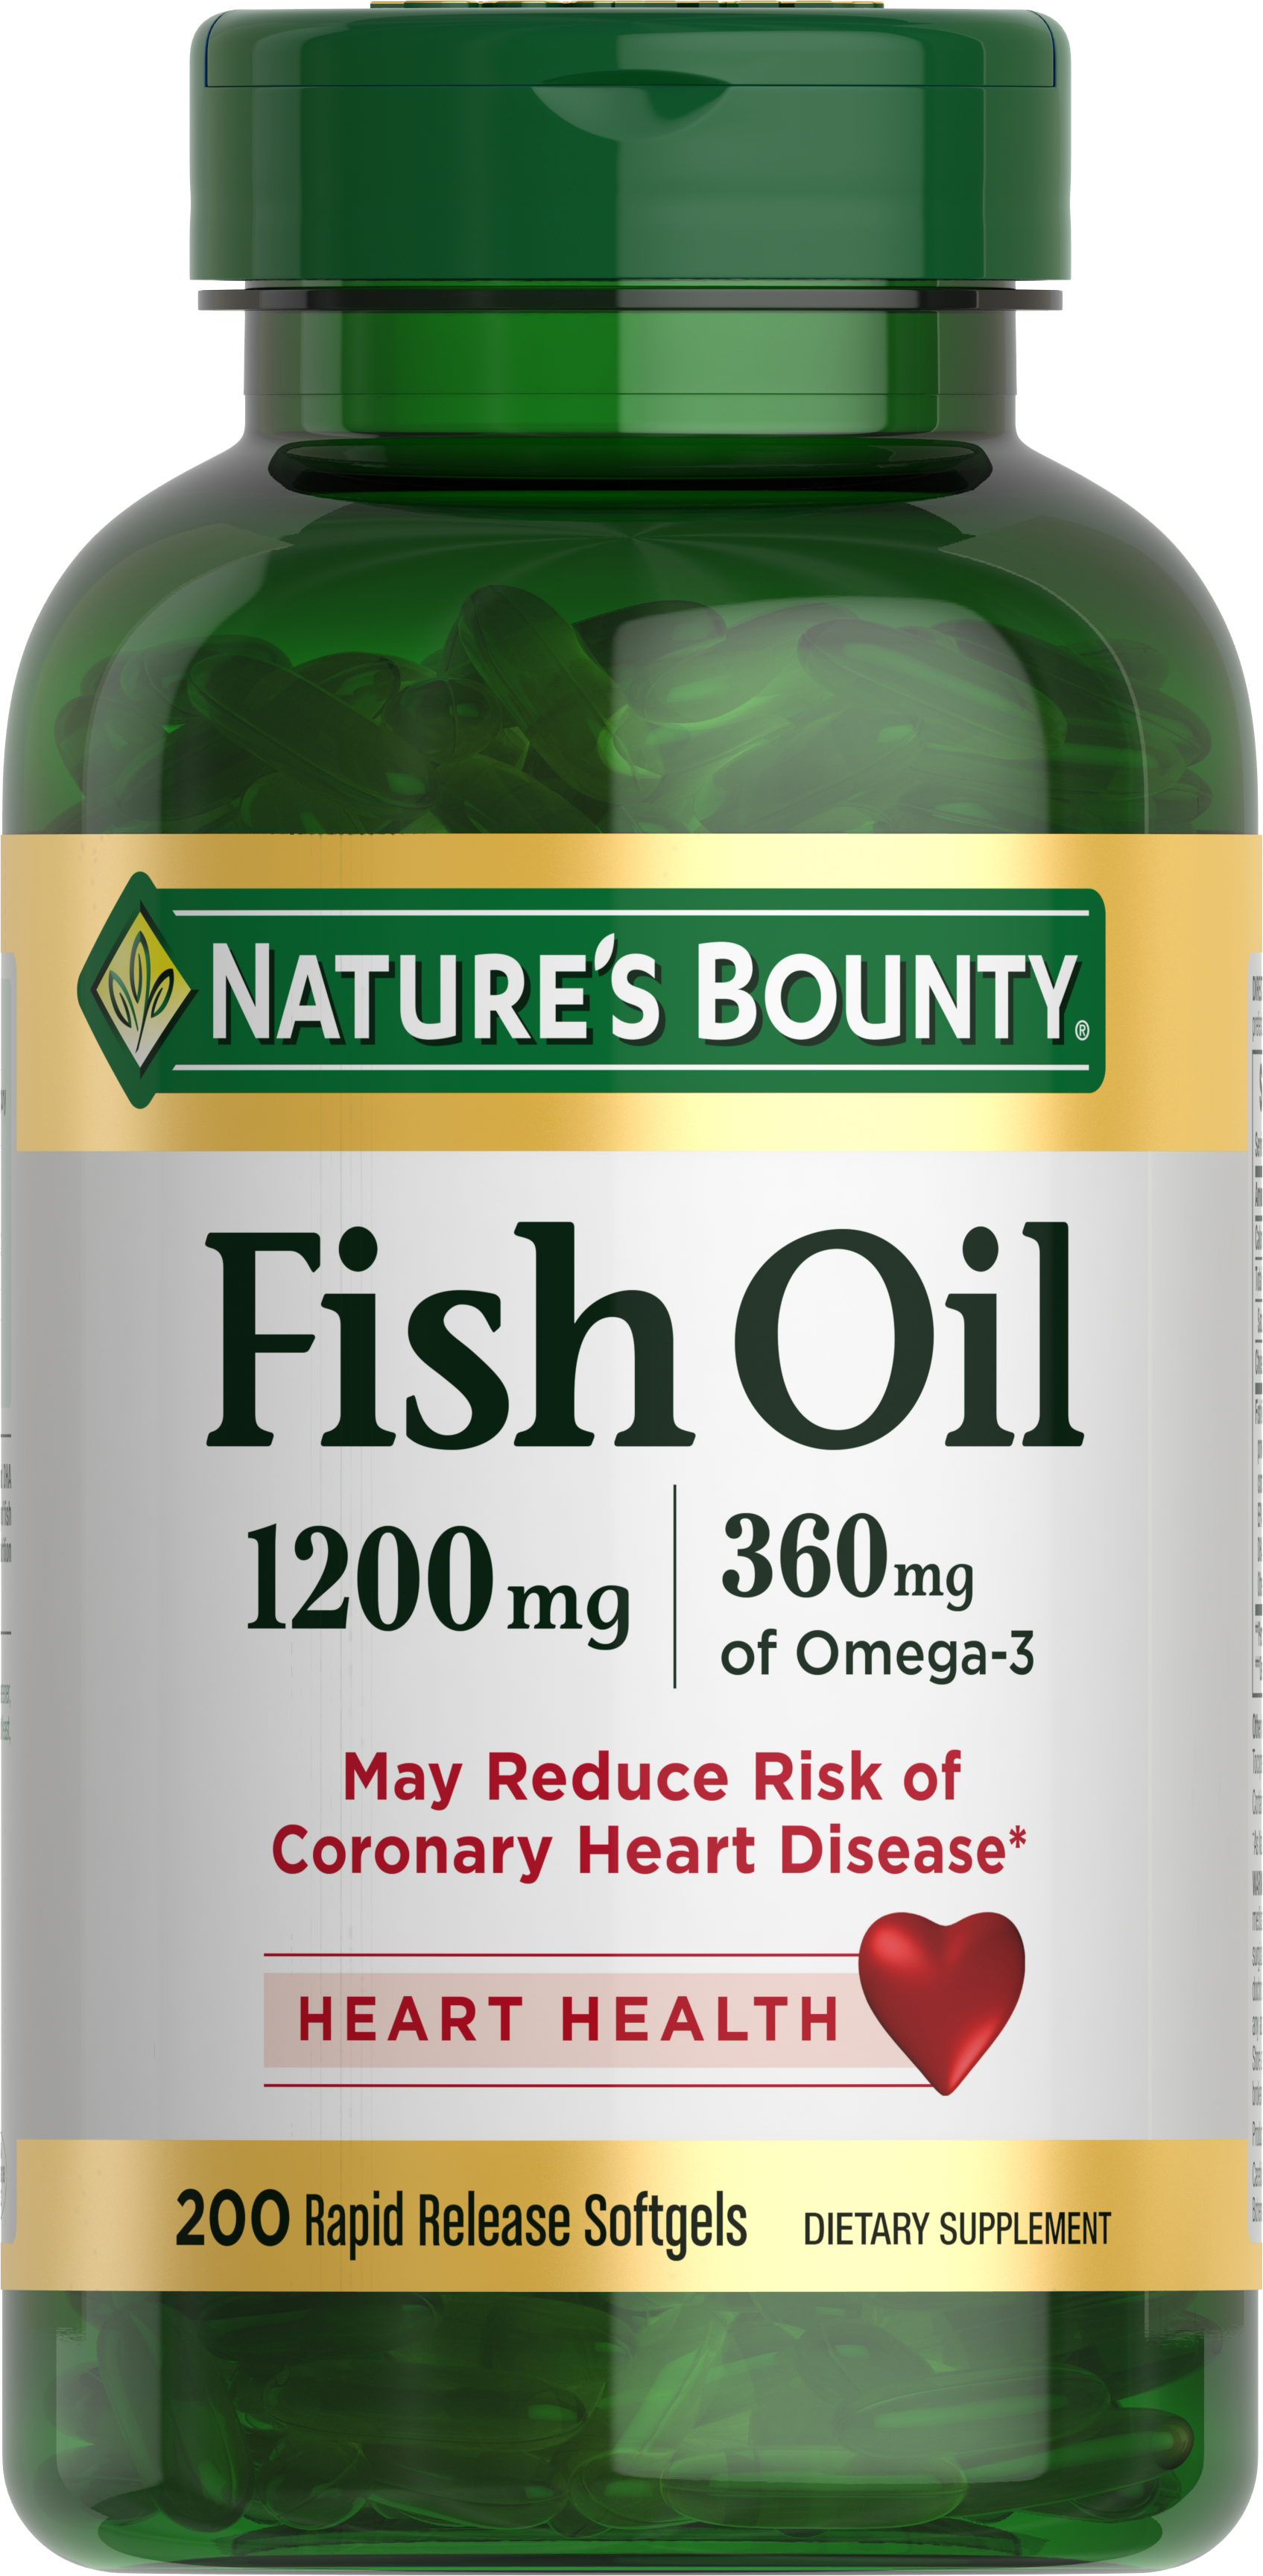 Nature's Bounty Fish Oil With Omega 3 Softgels, 1200 Mg, 200 Ct - image 1 of 8